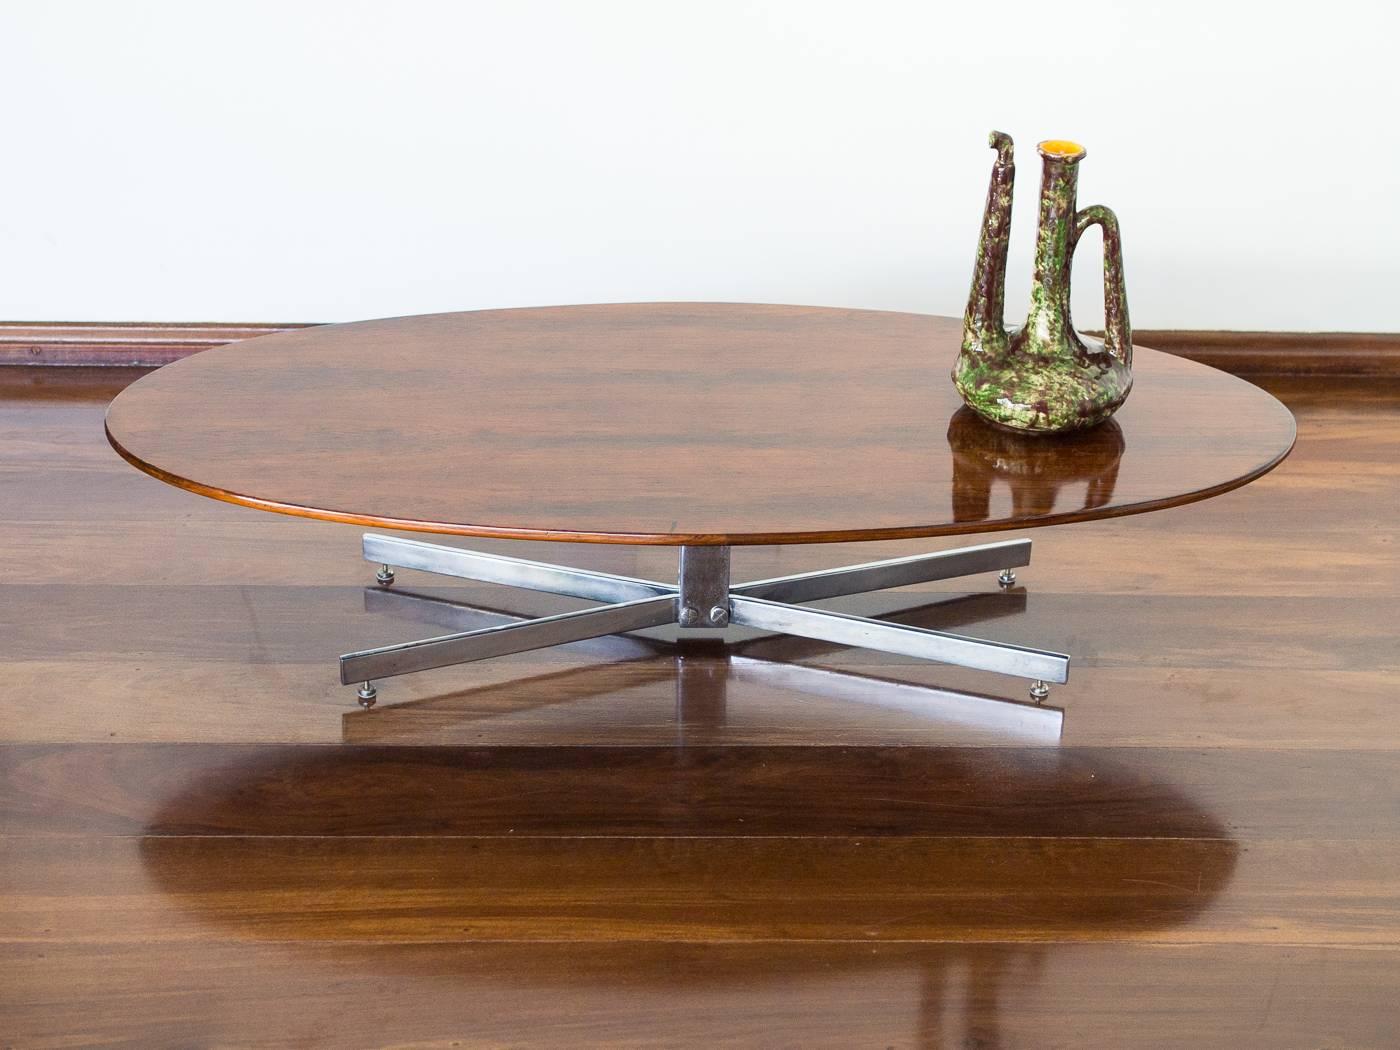  1960s Elliptical Coffee Table in Rosewood and Chrome by Jorge Zalszupin, Brazil 2